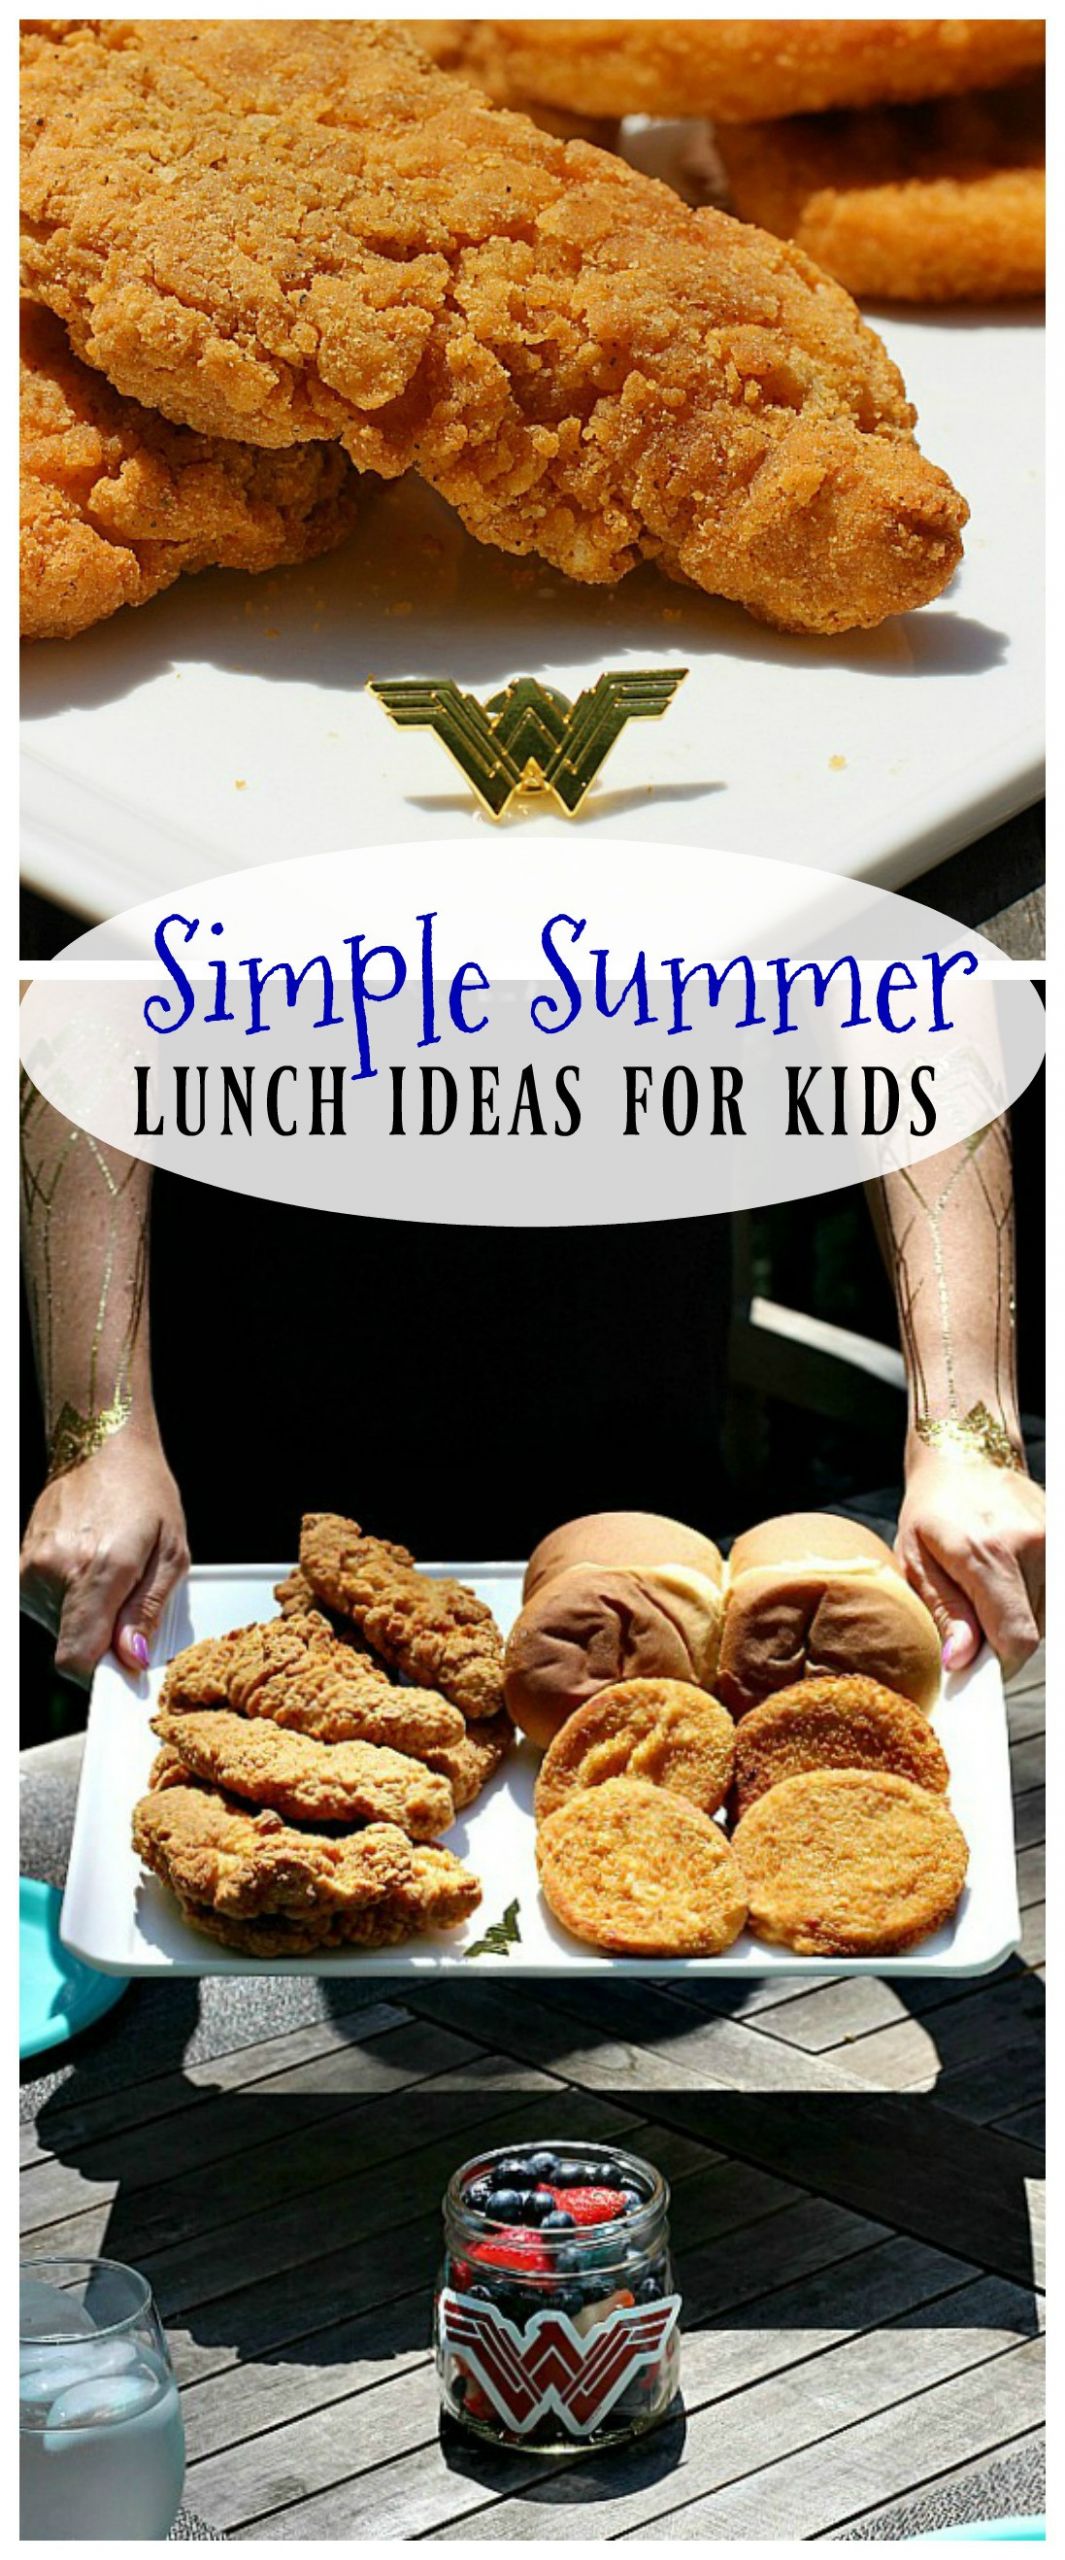 Easy Summer Lunch Ideas
 Simple Summer Lunch Ideas for Kids The Adventures of J